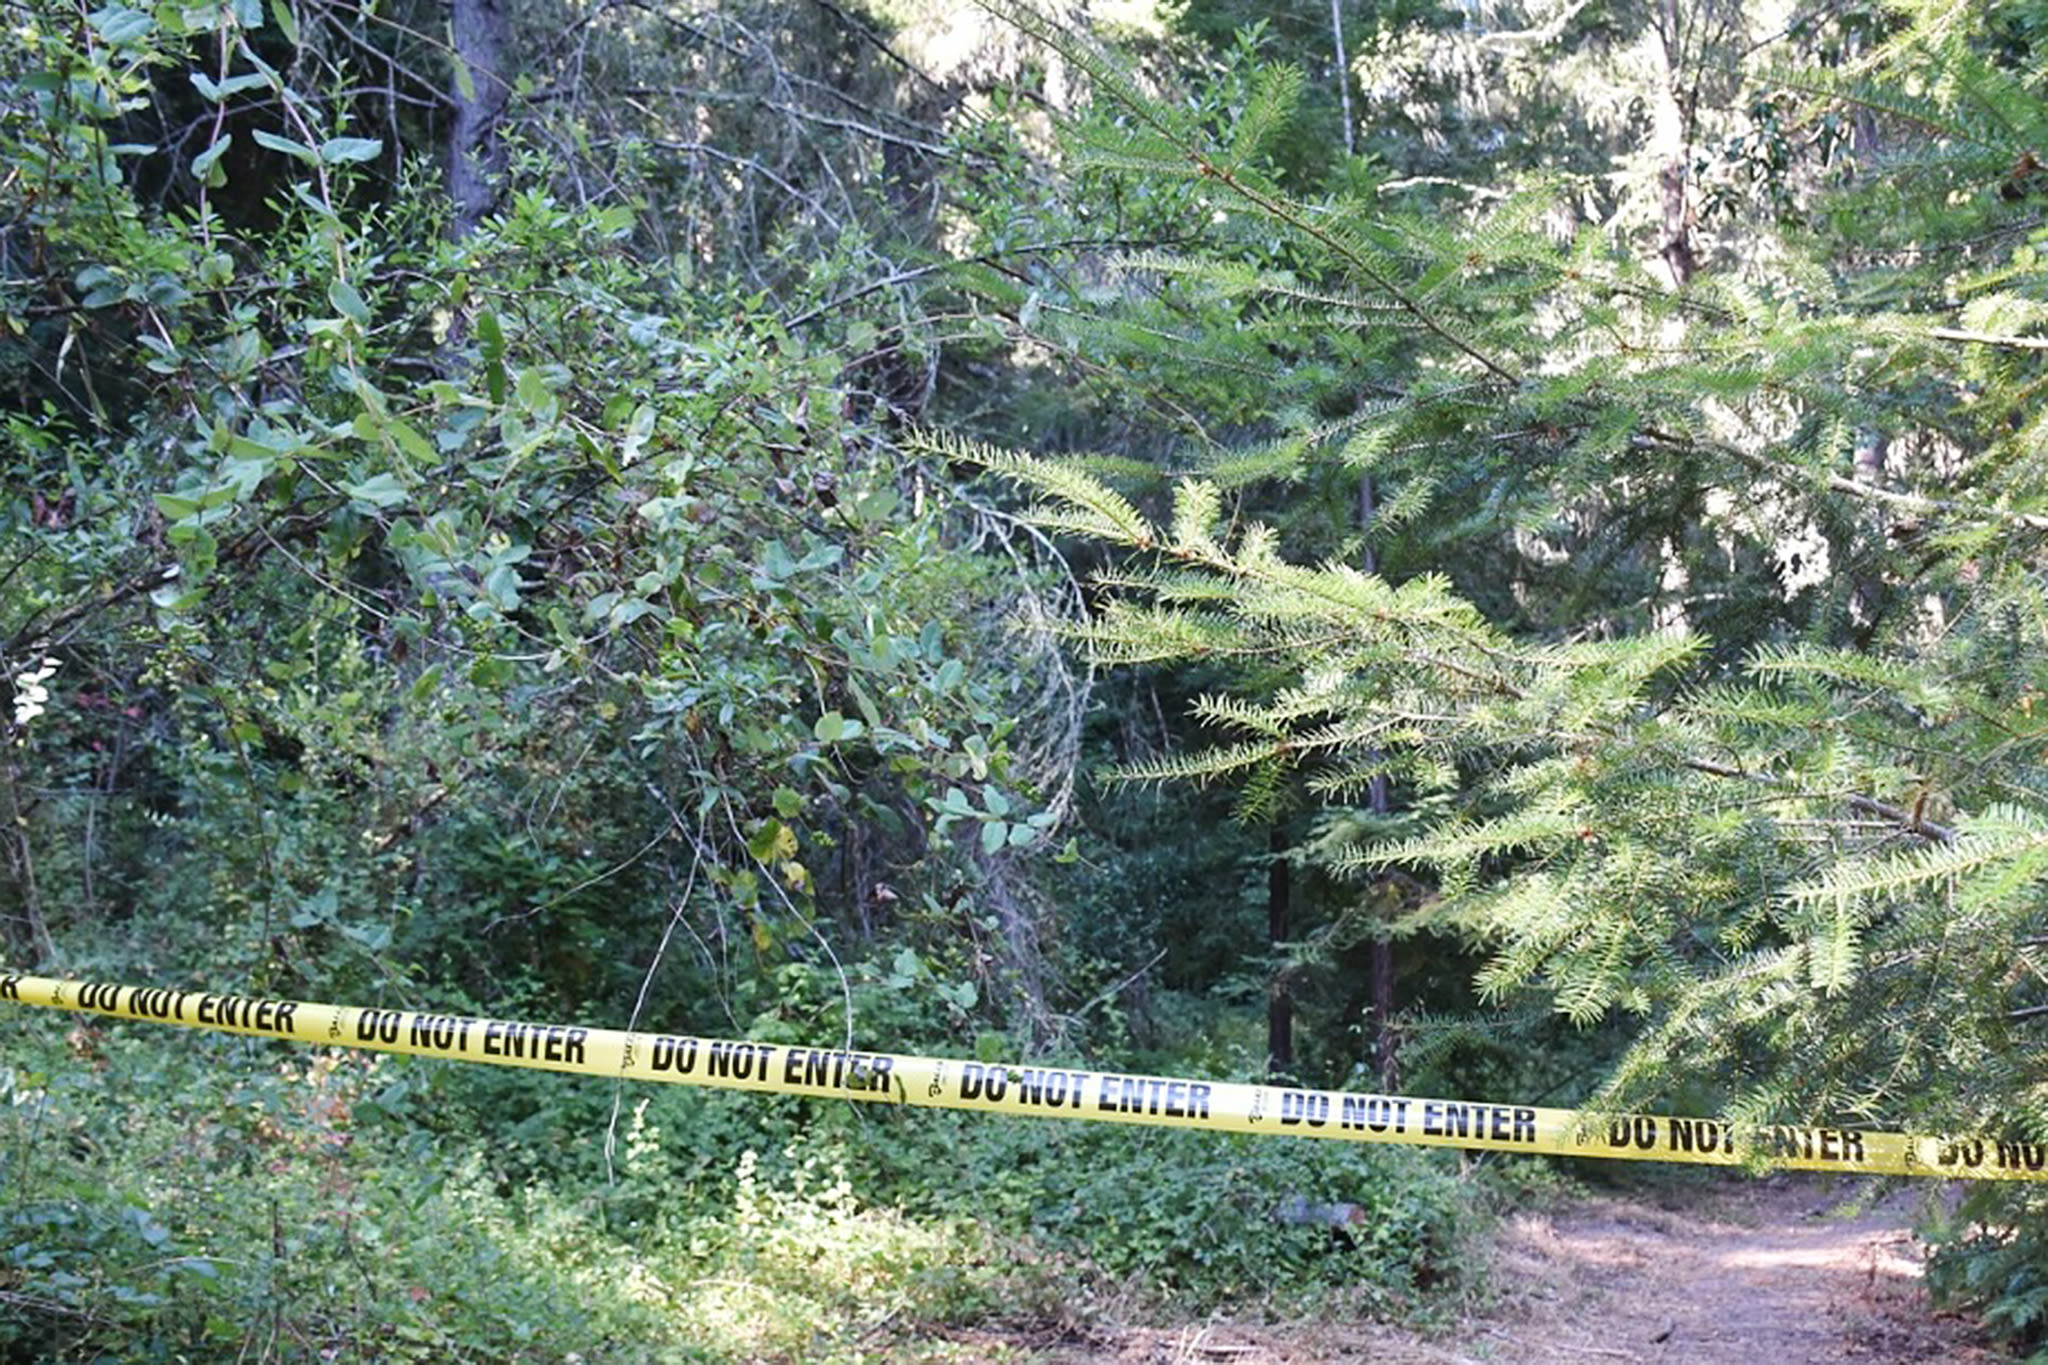 Missing California mother found dead near hiking trail, police say